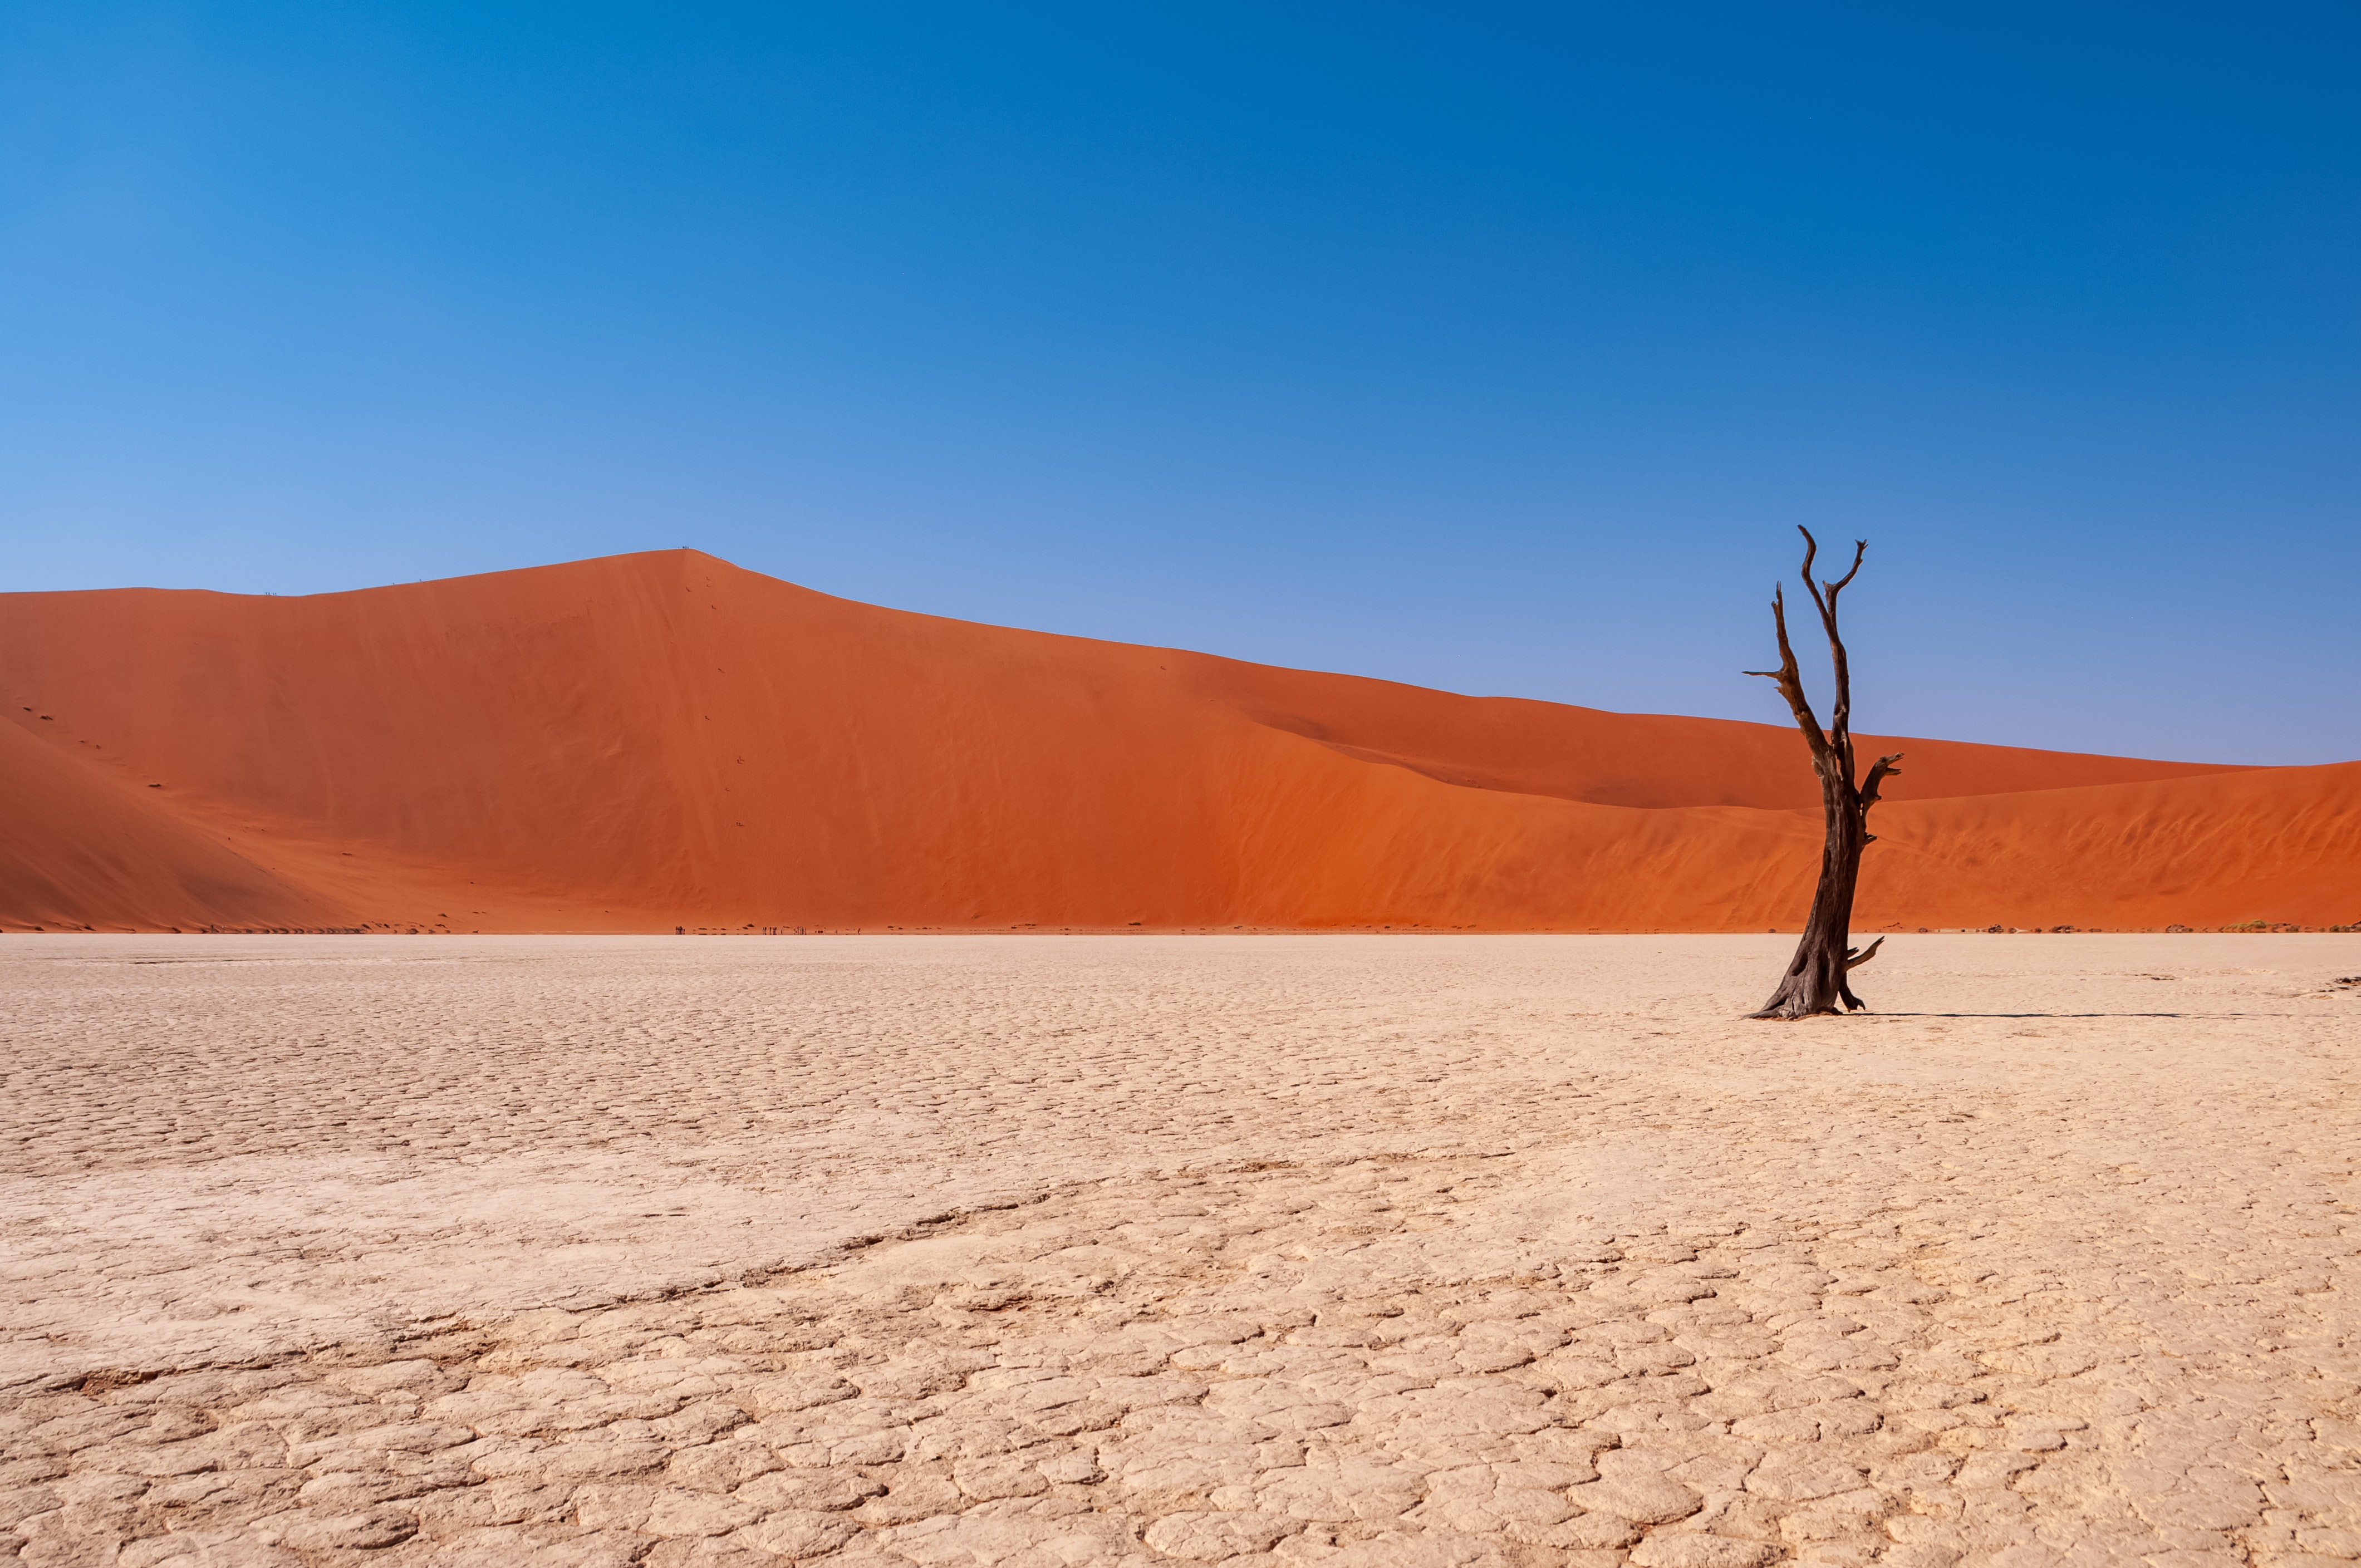 A tree in the desert with a dune and blue sky behind